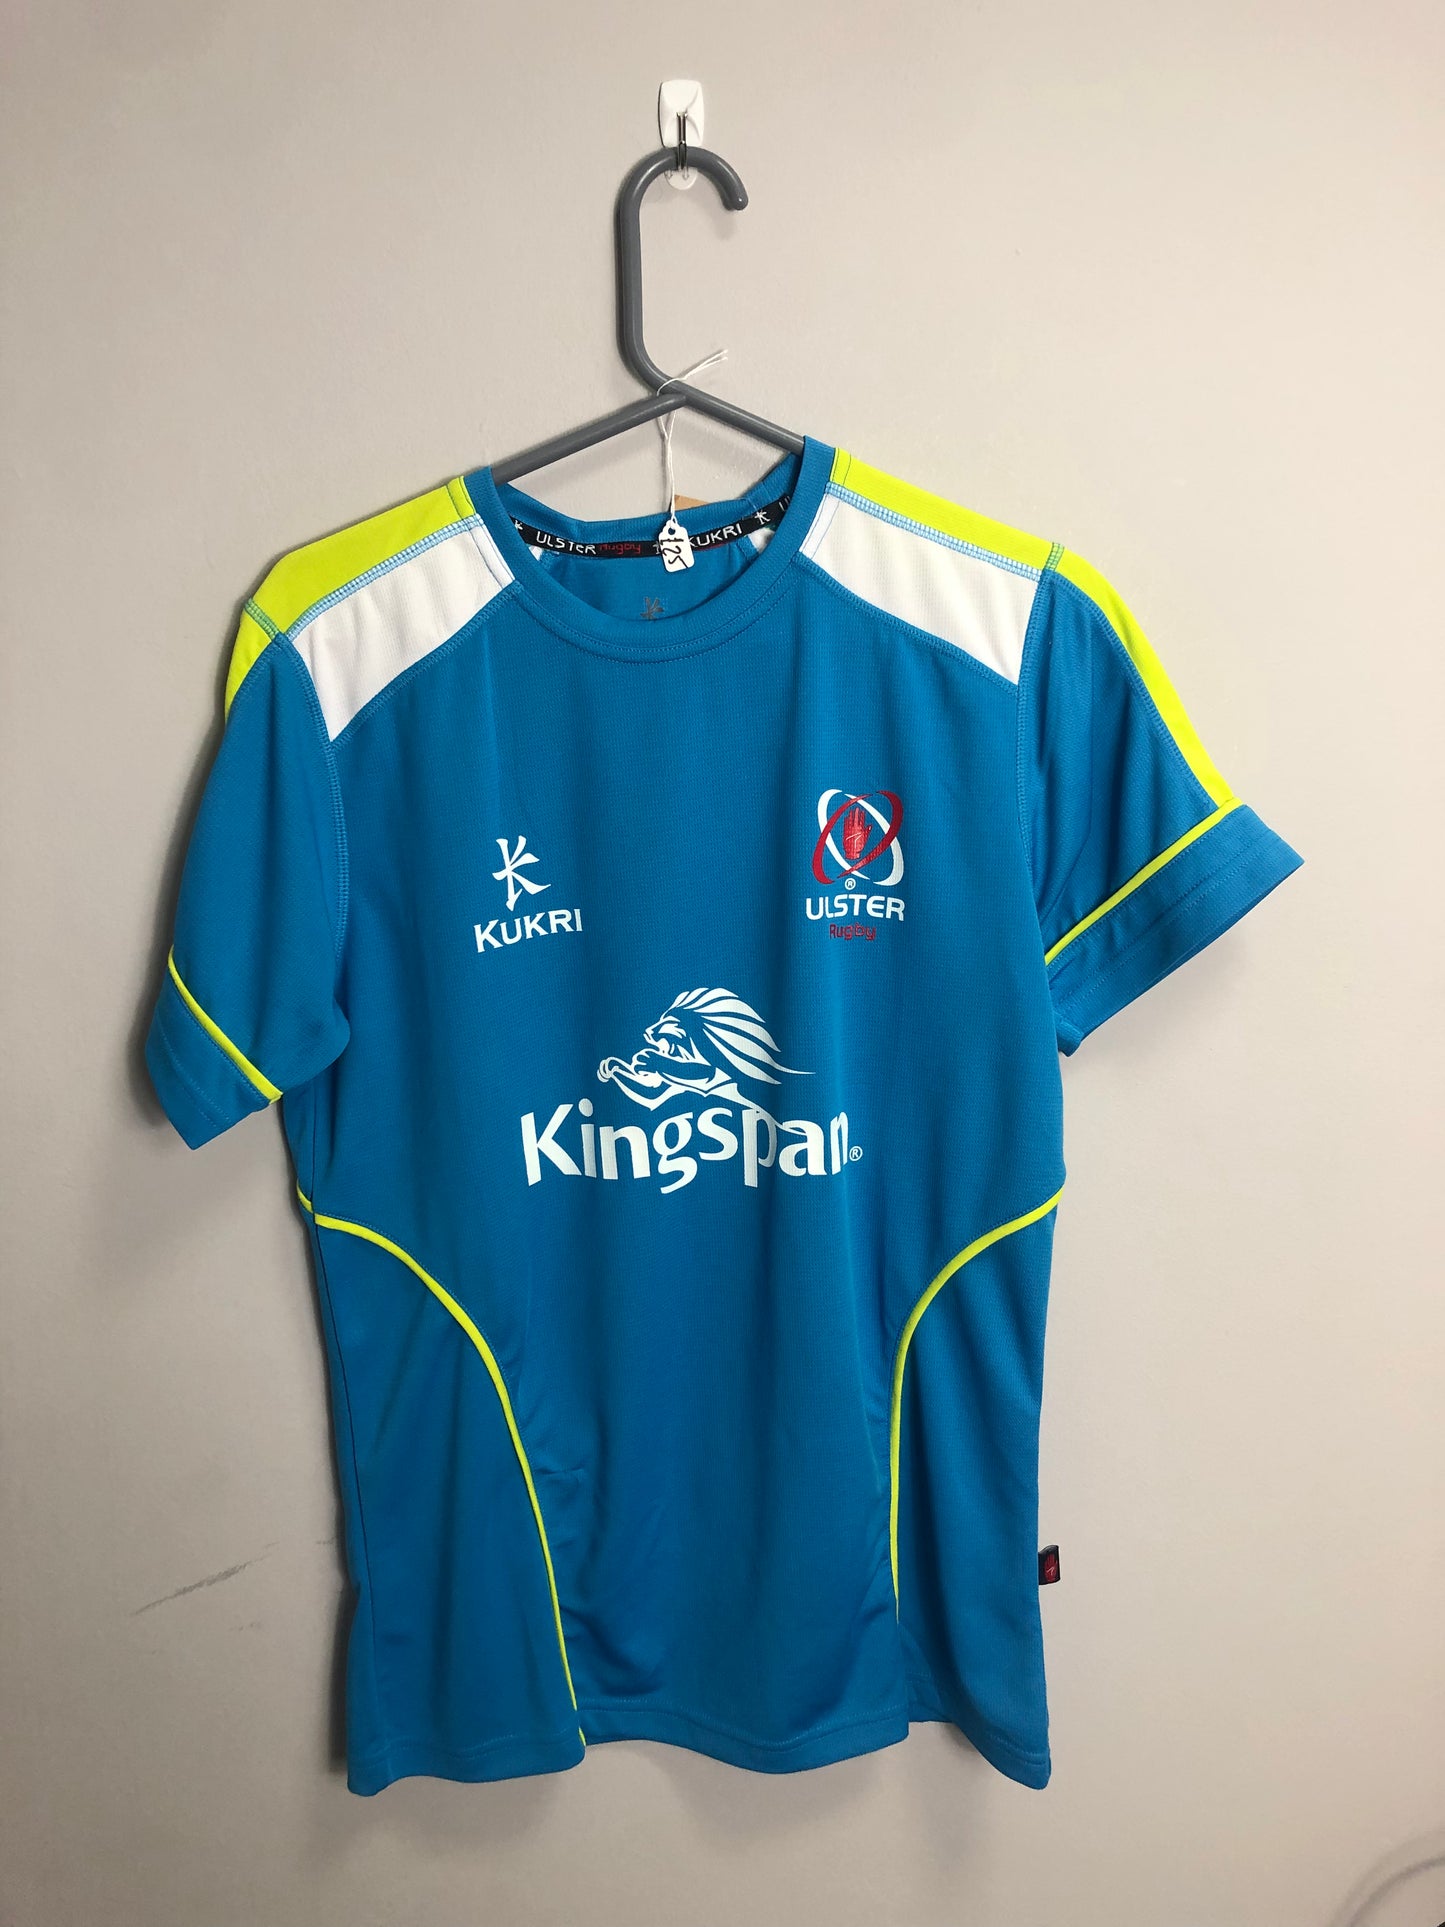 Ulster Training Tee Shirt - 38” Chest - Small